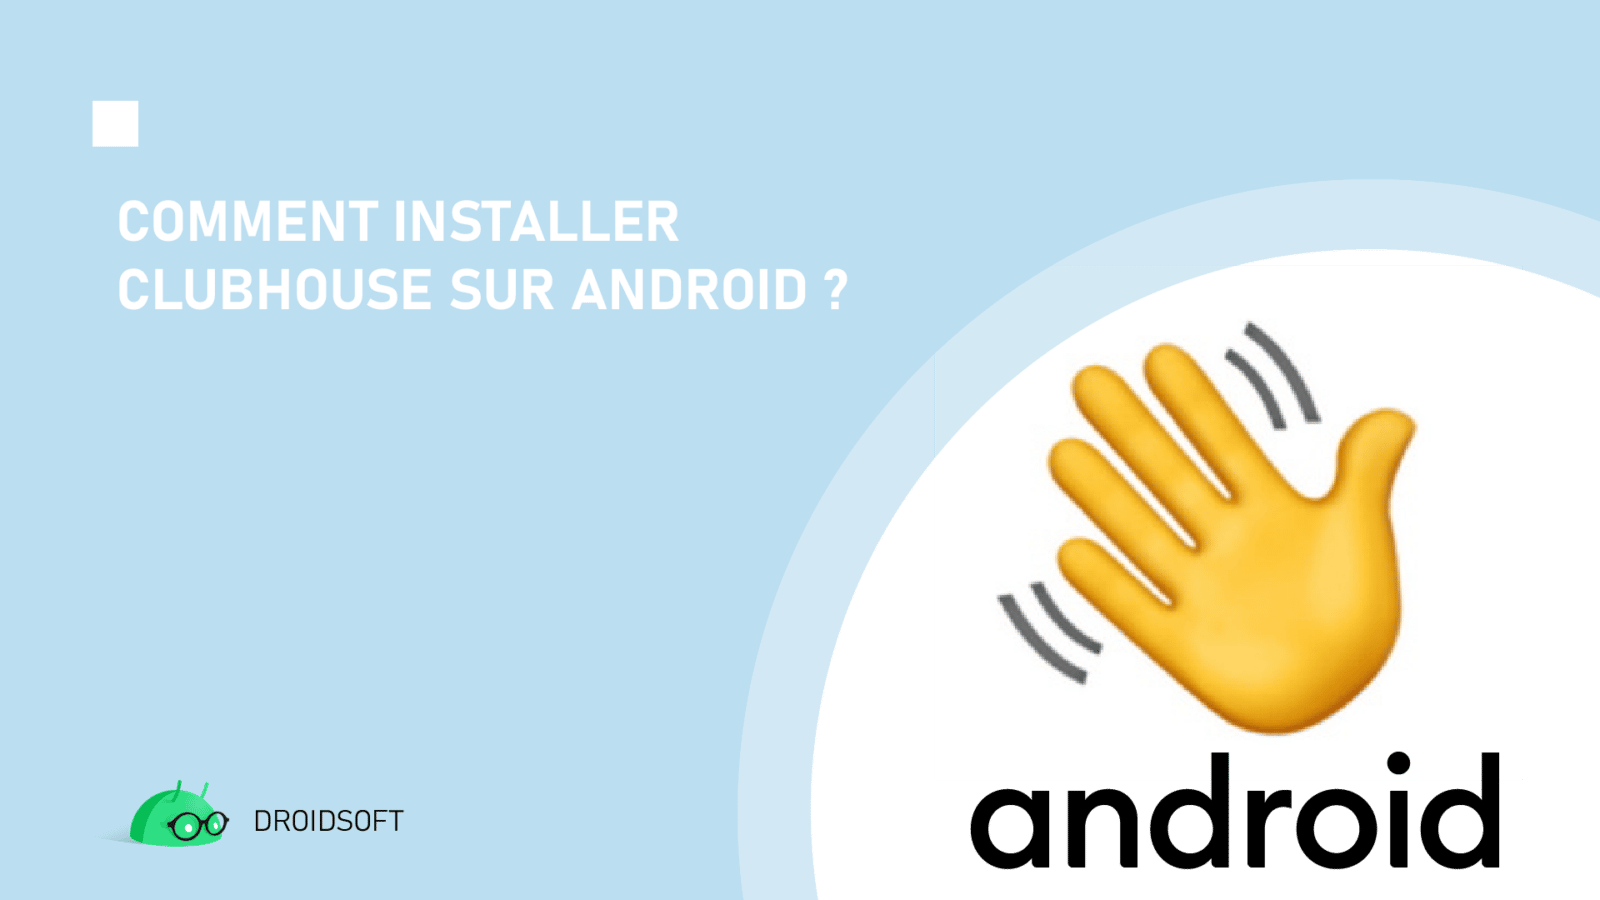 comment installer clubhouse sur android?